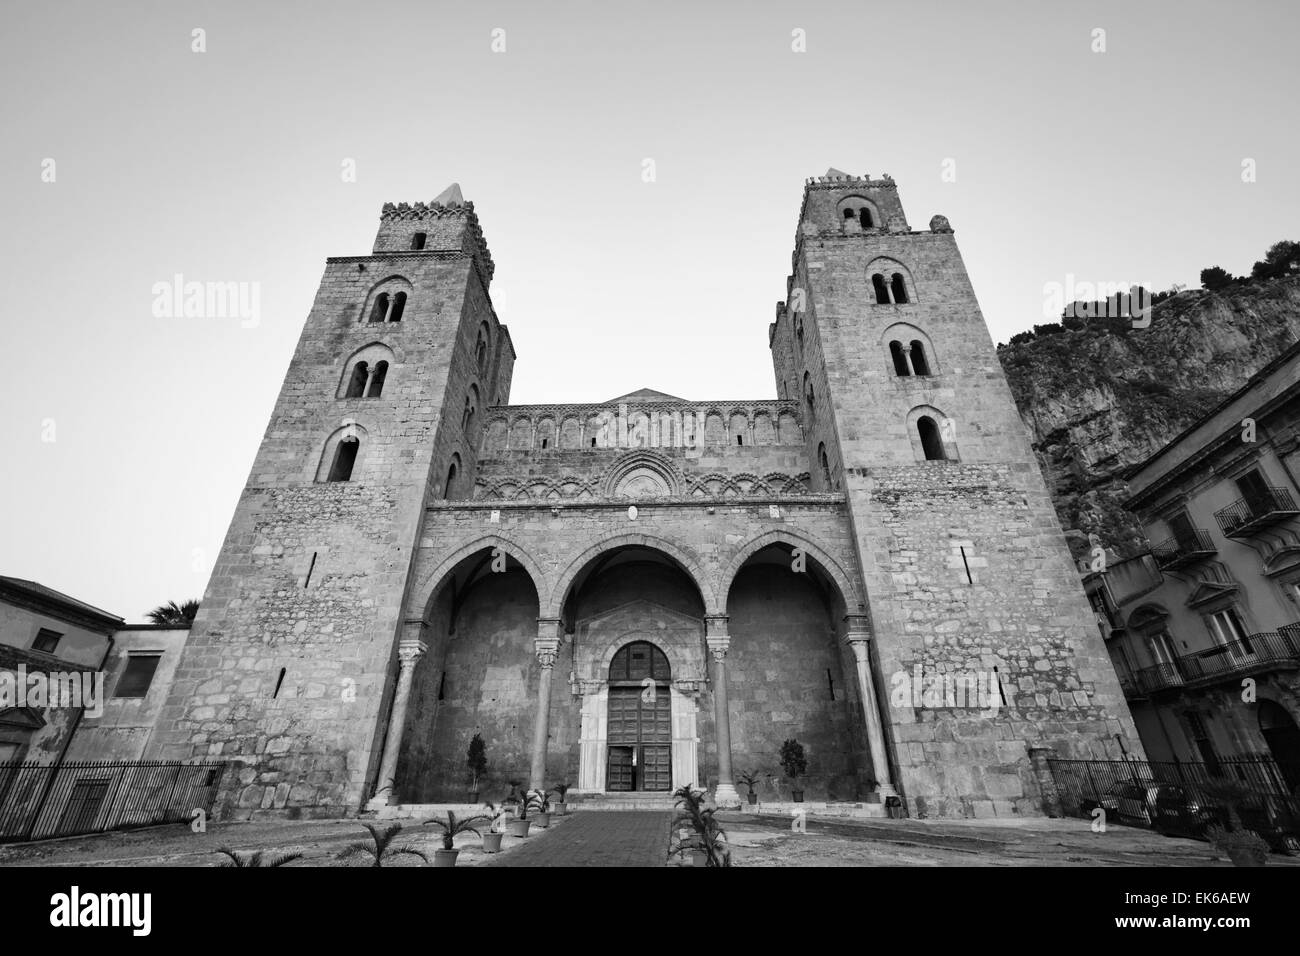 Italy, Sicily, Cefal, view of the Cathedral (Duomo) at sunset Stock Photo